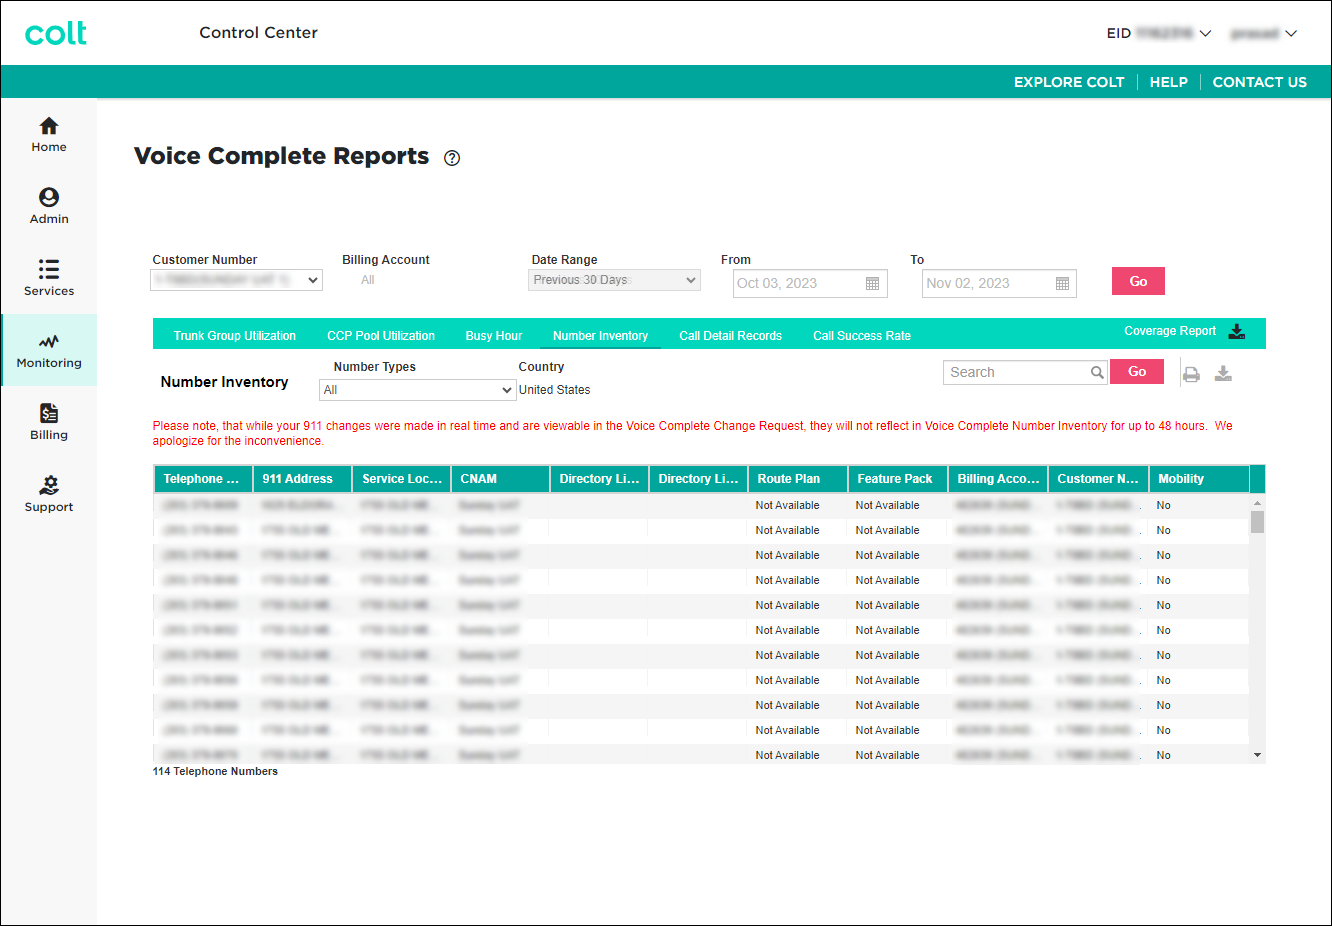 Voice Complete Reports (showing Number Inventory)